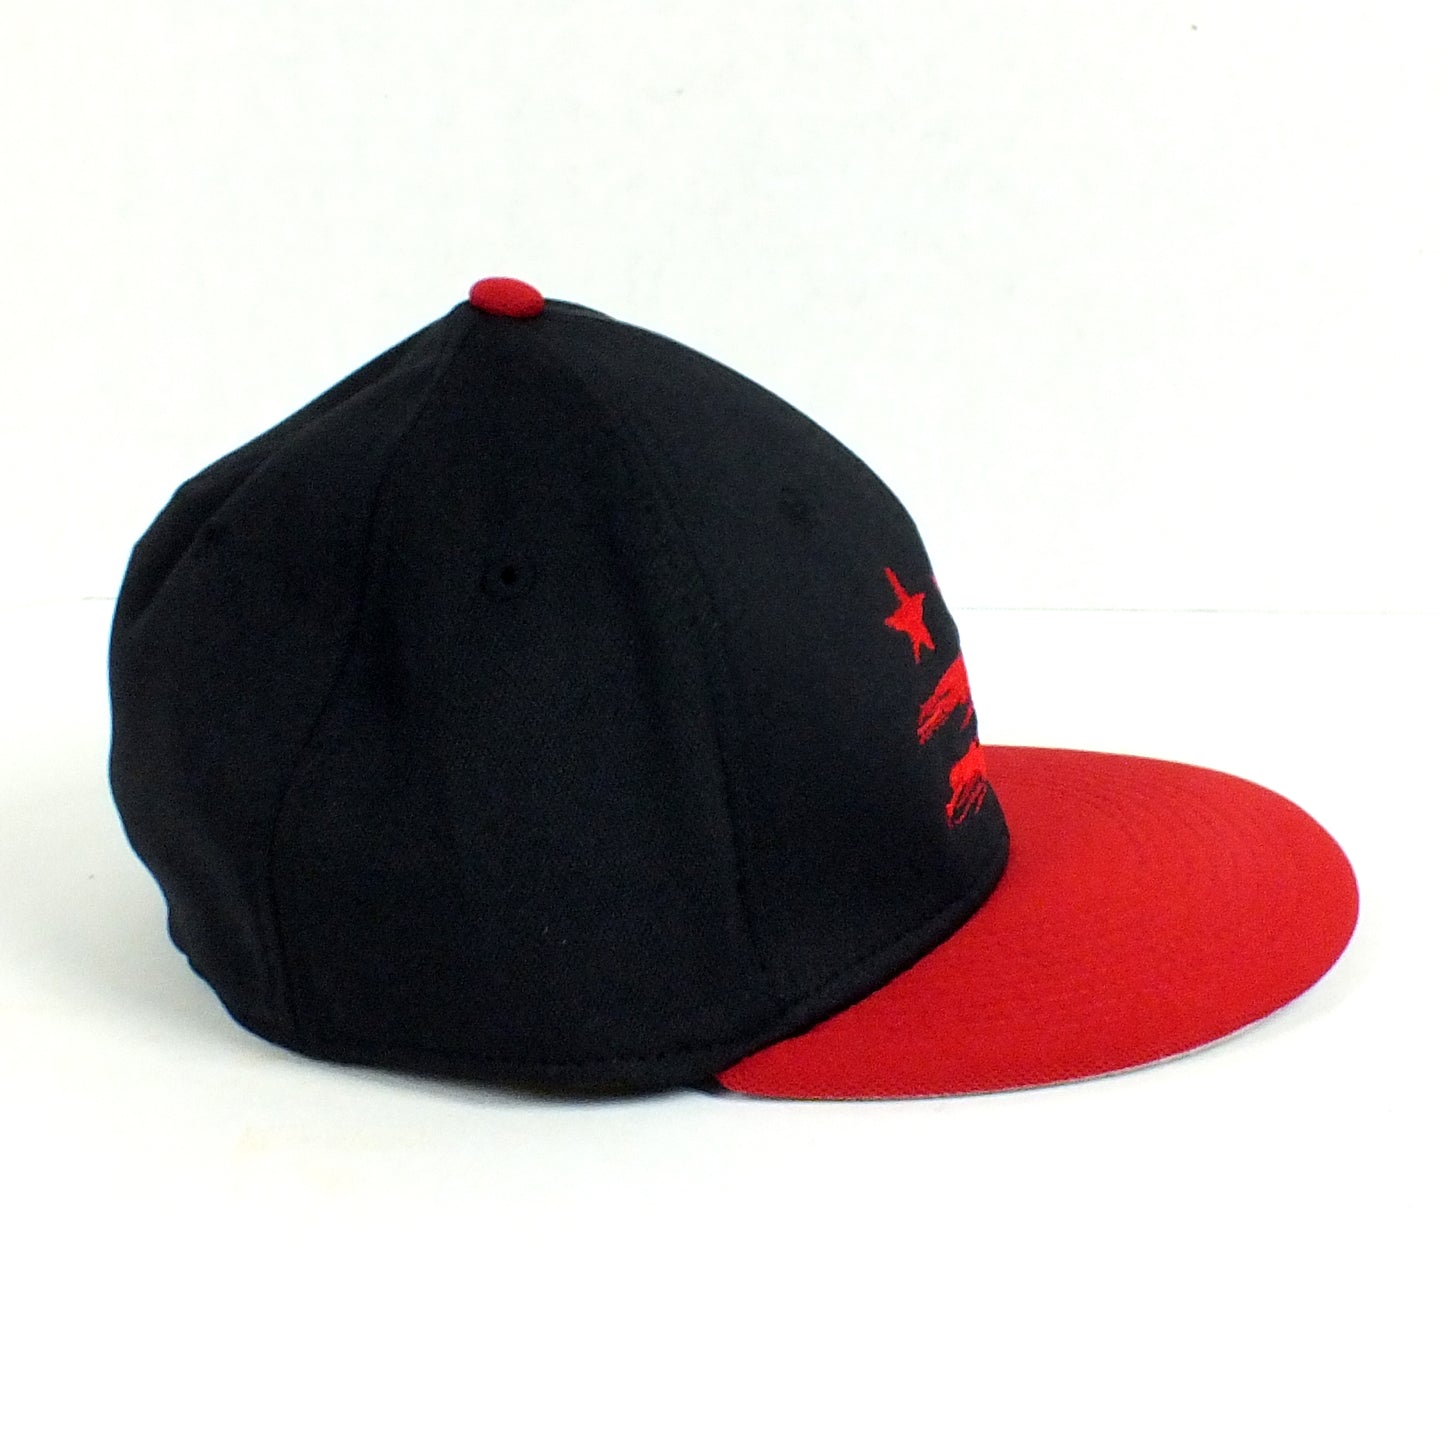 Washington DC Flag Black and Red Fitted Flat Brim Hat